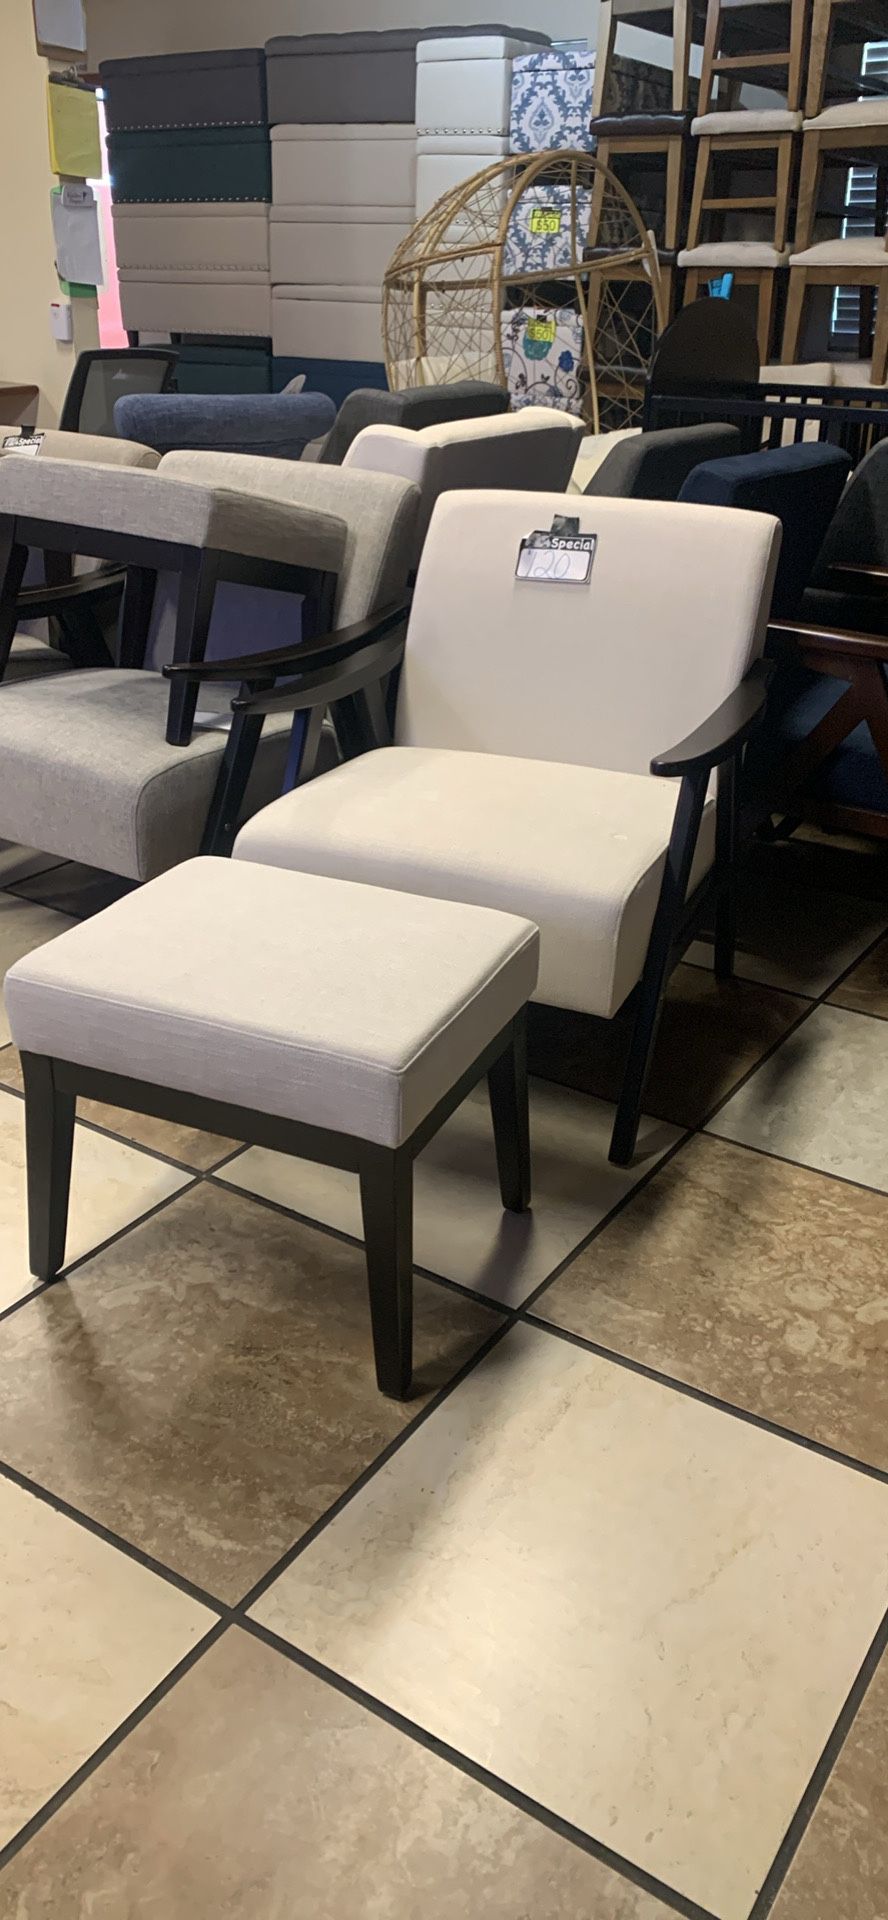 Brand New Accent Chair With Wooden Arm Rest And Ottoman Foot Rest 